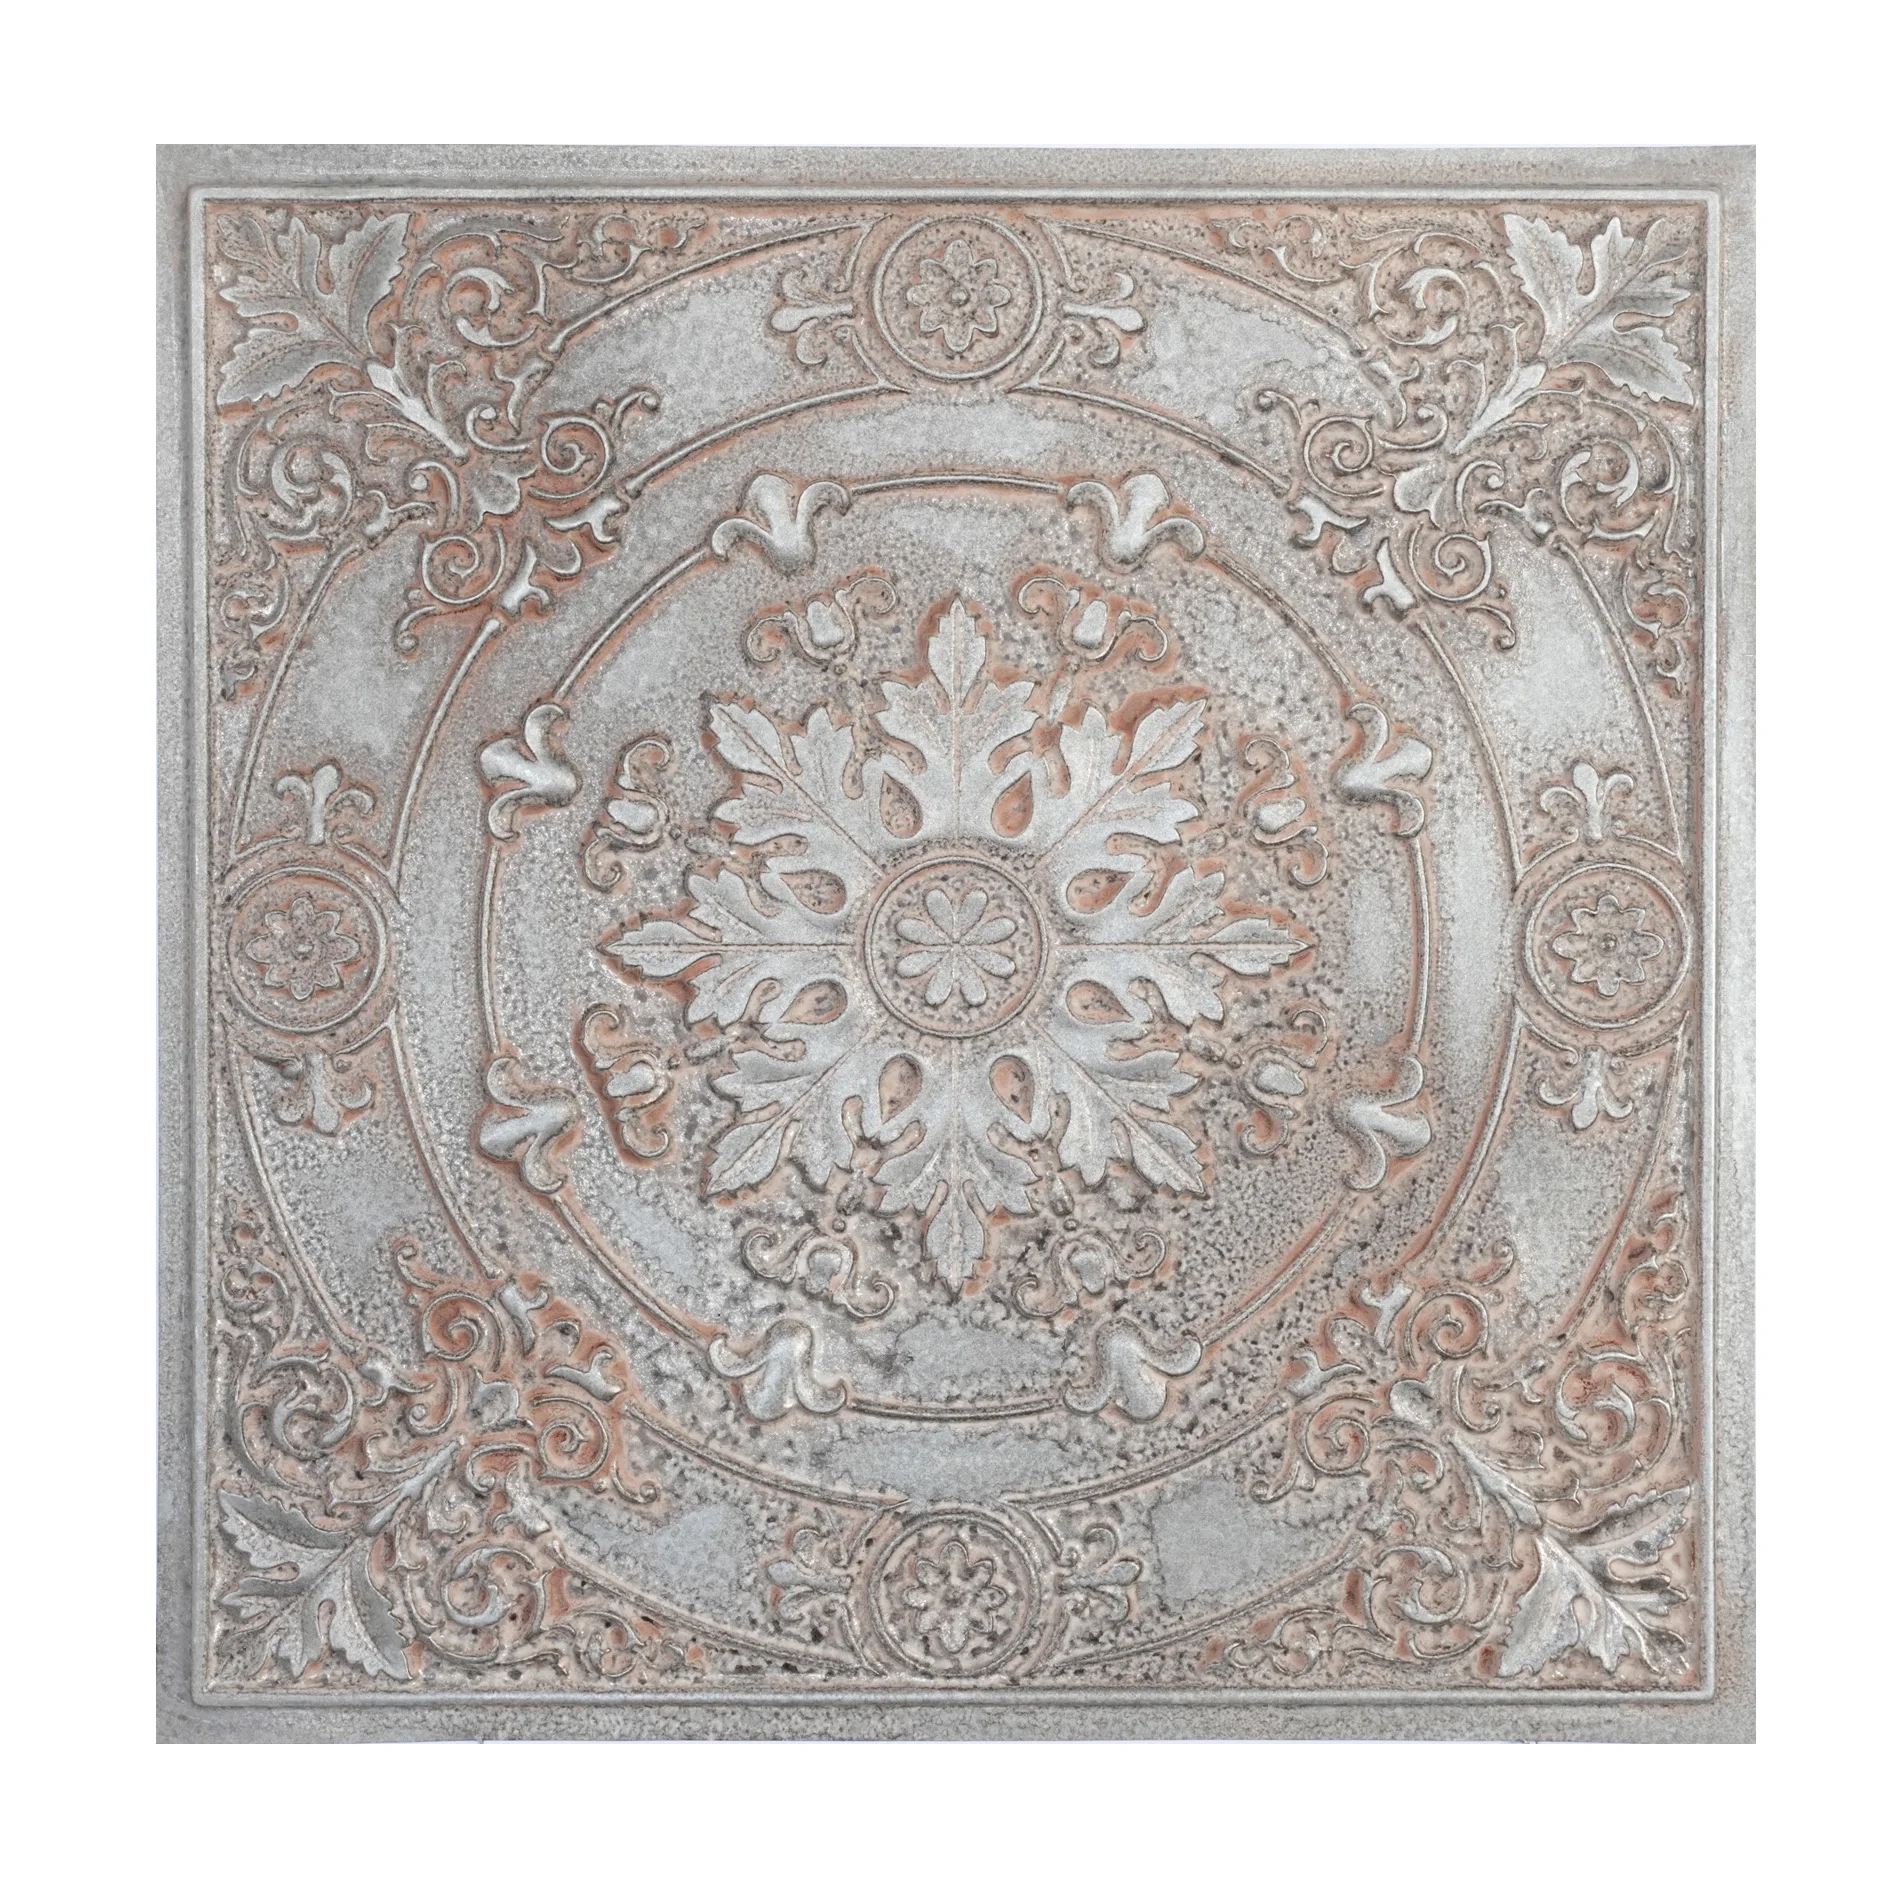 Tin ceiling tiles faux painted color night club wall panel PL18 Weathered iron